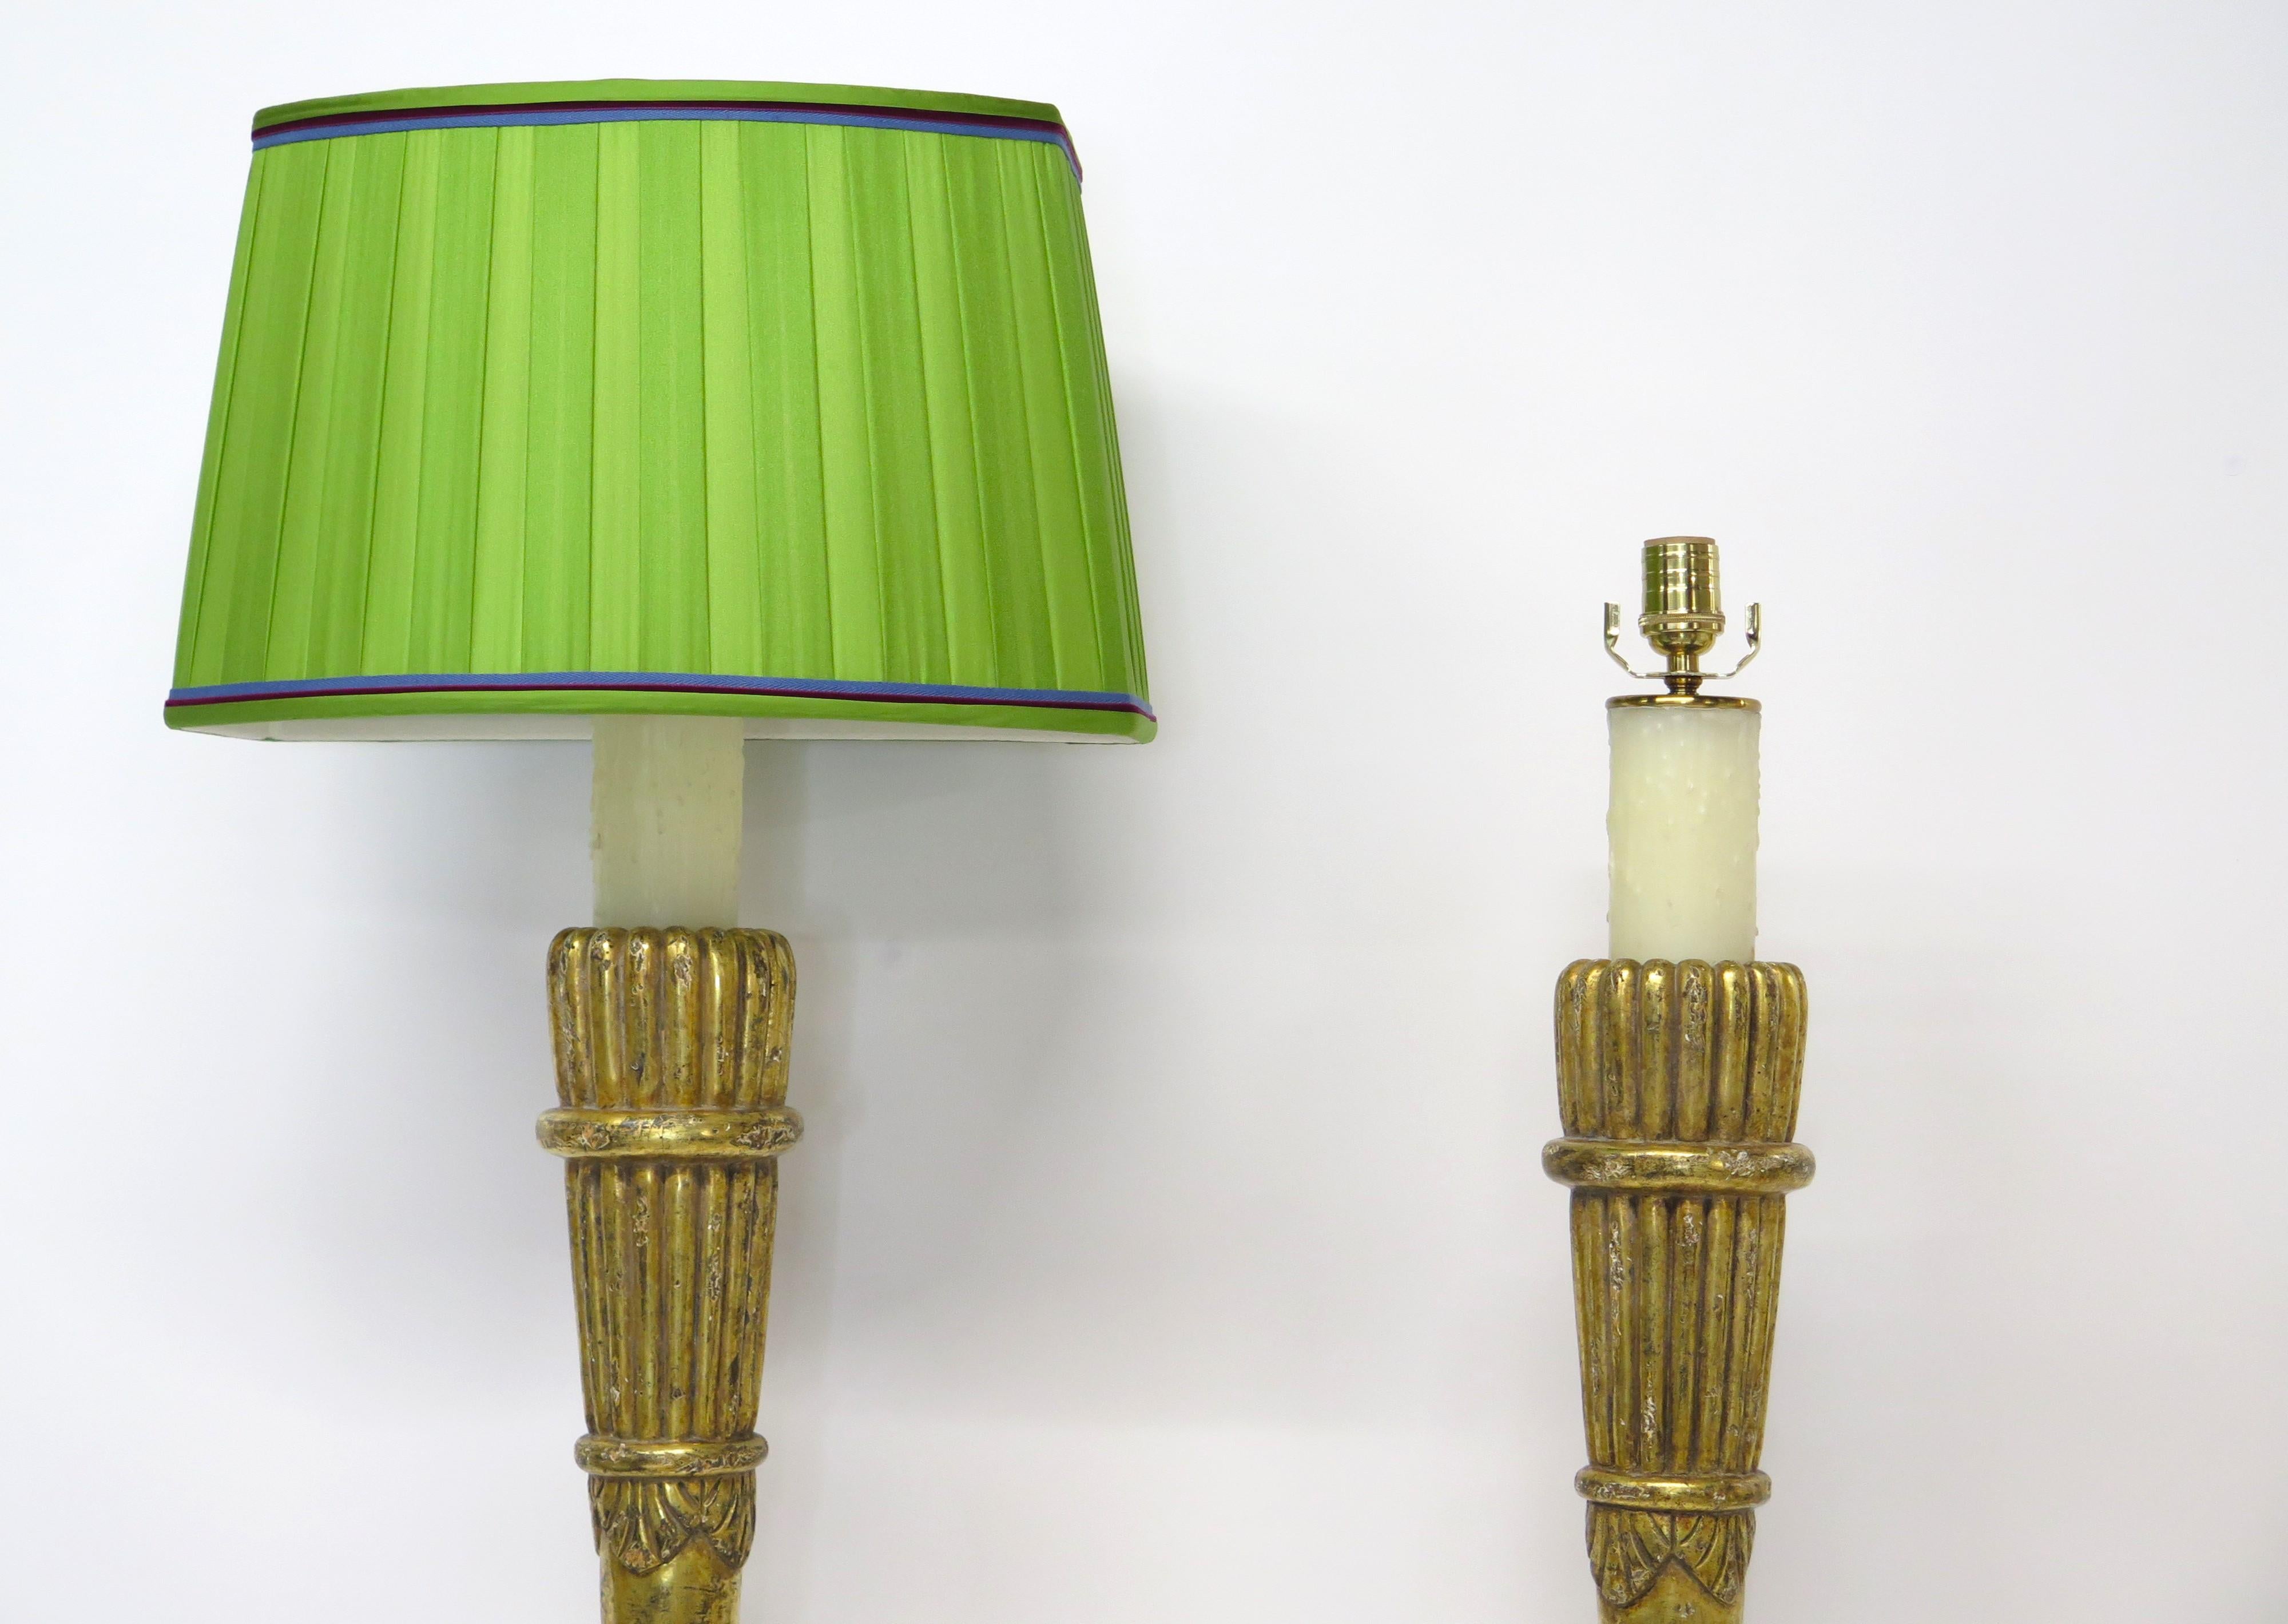 Pair of Art Deco Giltwood Sconces in the Form of Stylized Wall Torches For Sale 3